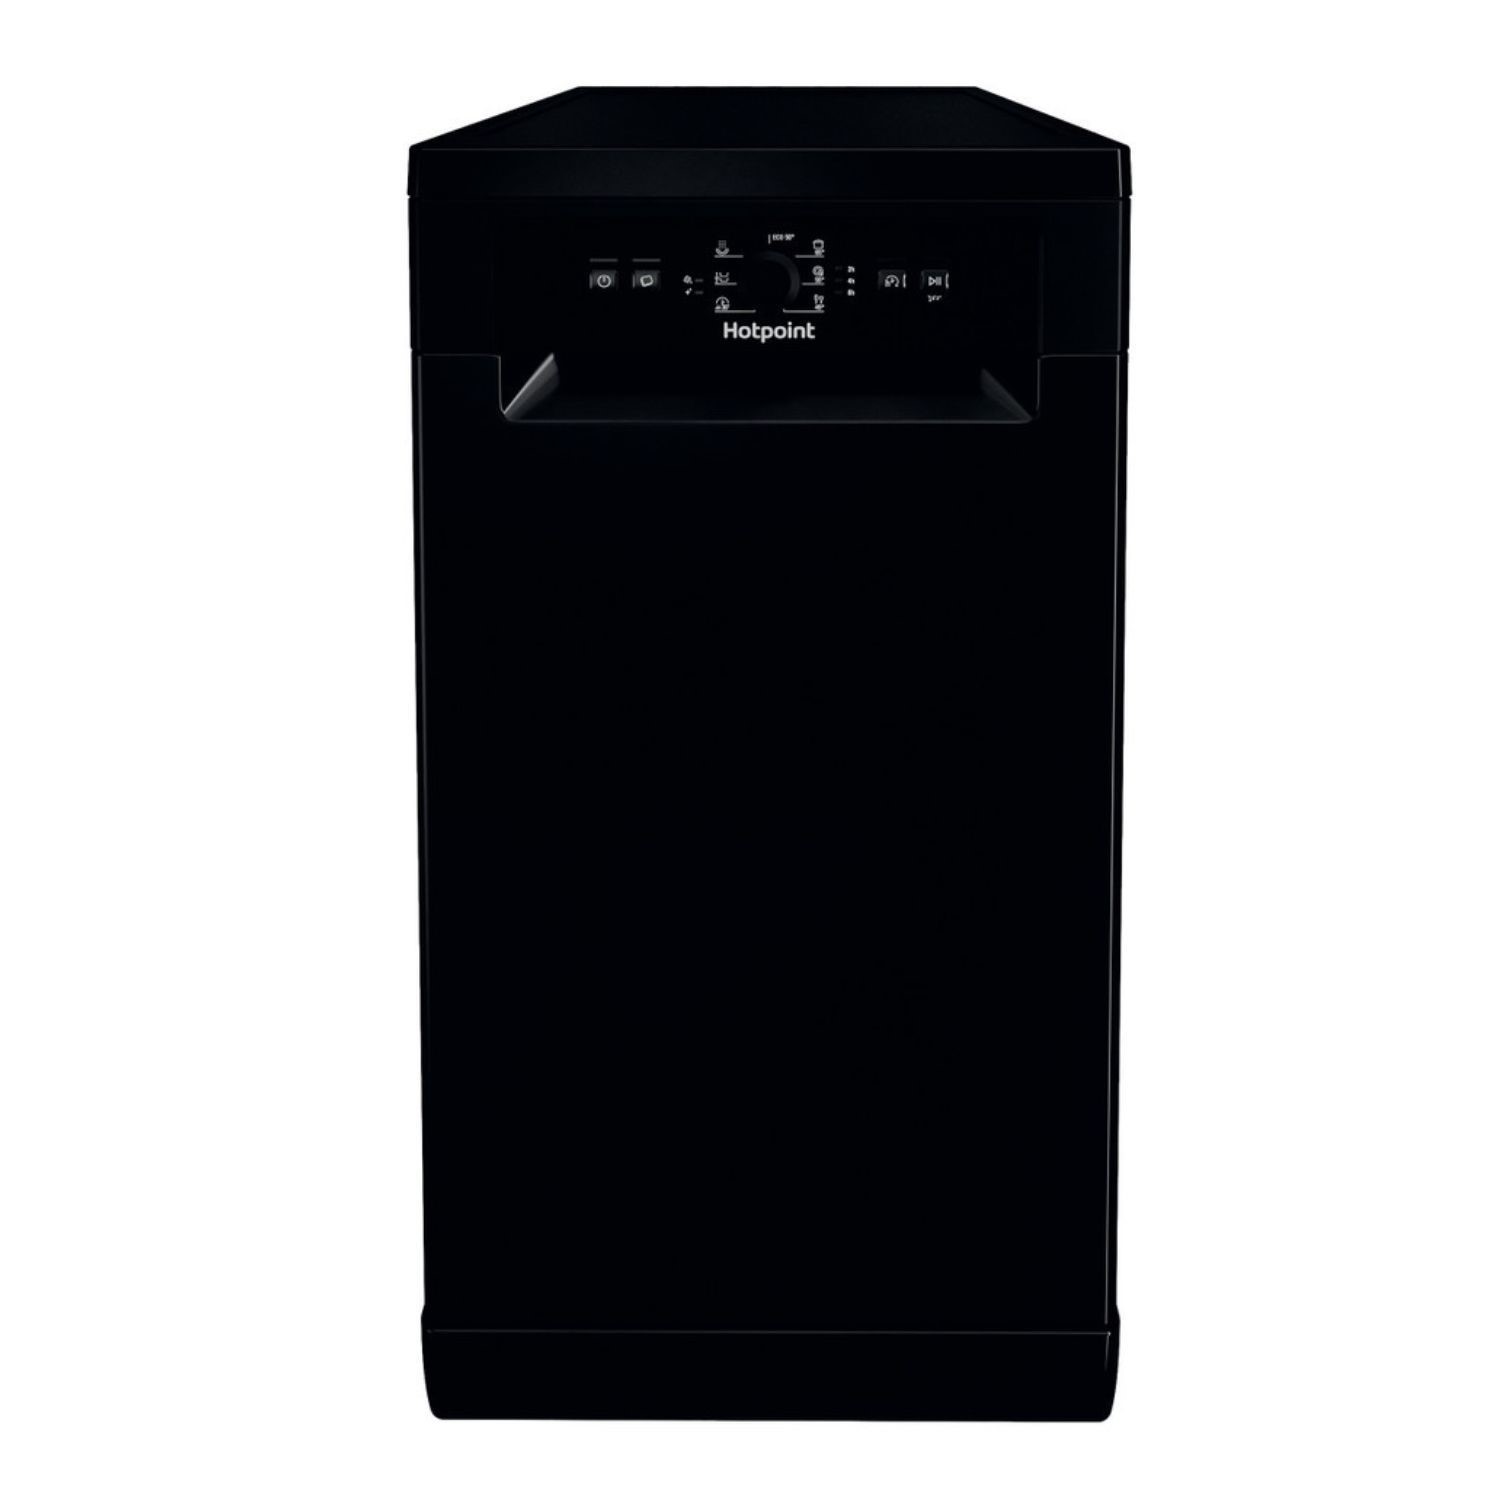 Photos - Other for Computer Hotpoint-Ariston HOTPOINT 9 Place Settings Freestanding Slimline Dishwasher - Black 8699916 